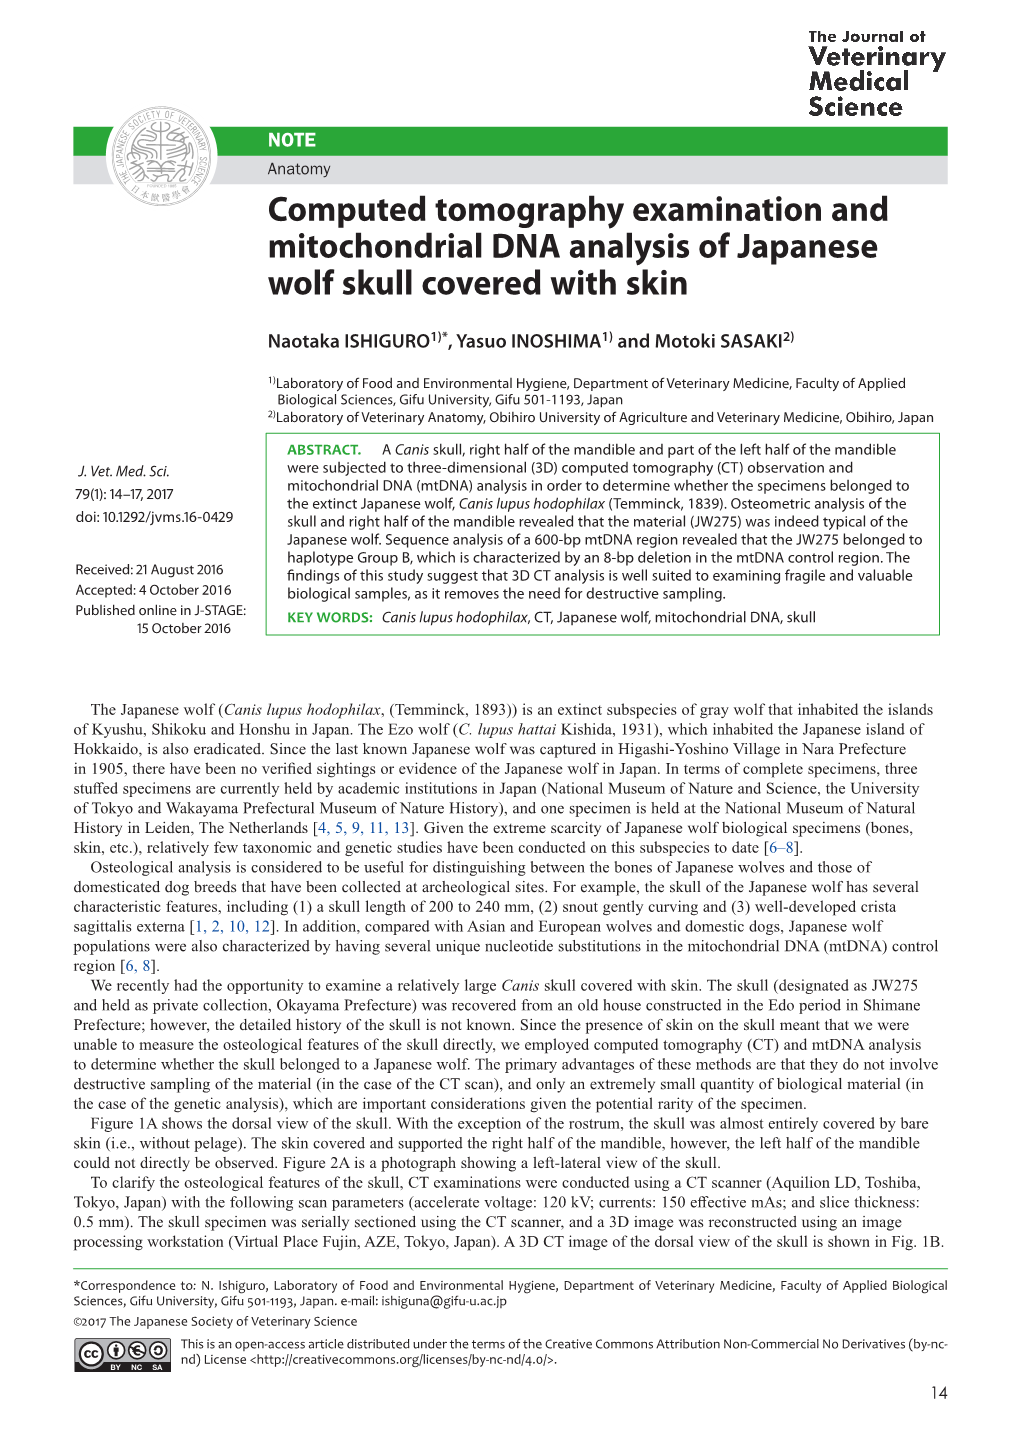 Computed Tomography Examination and Mitochondrial DNA Analysis of Japanese Wolf Skull Covered with Skin